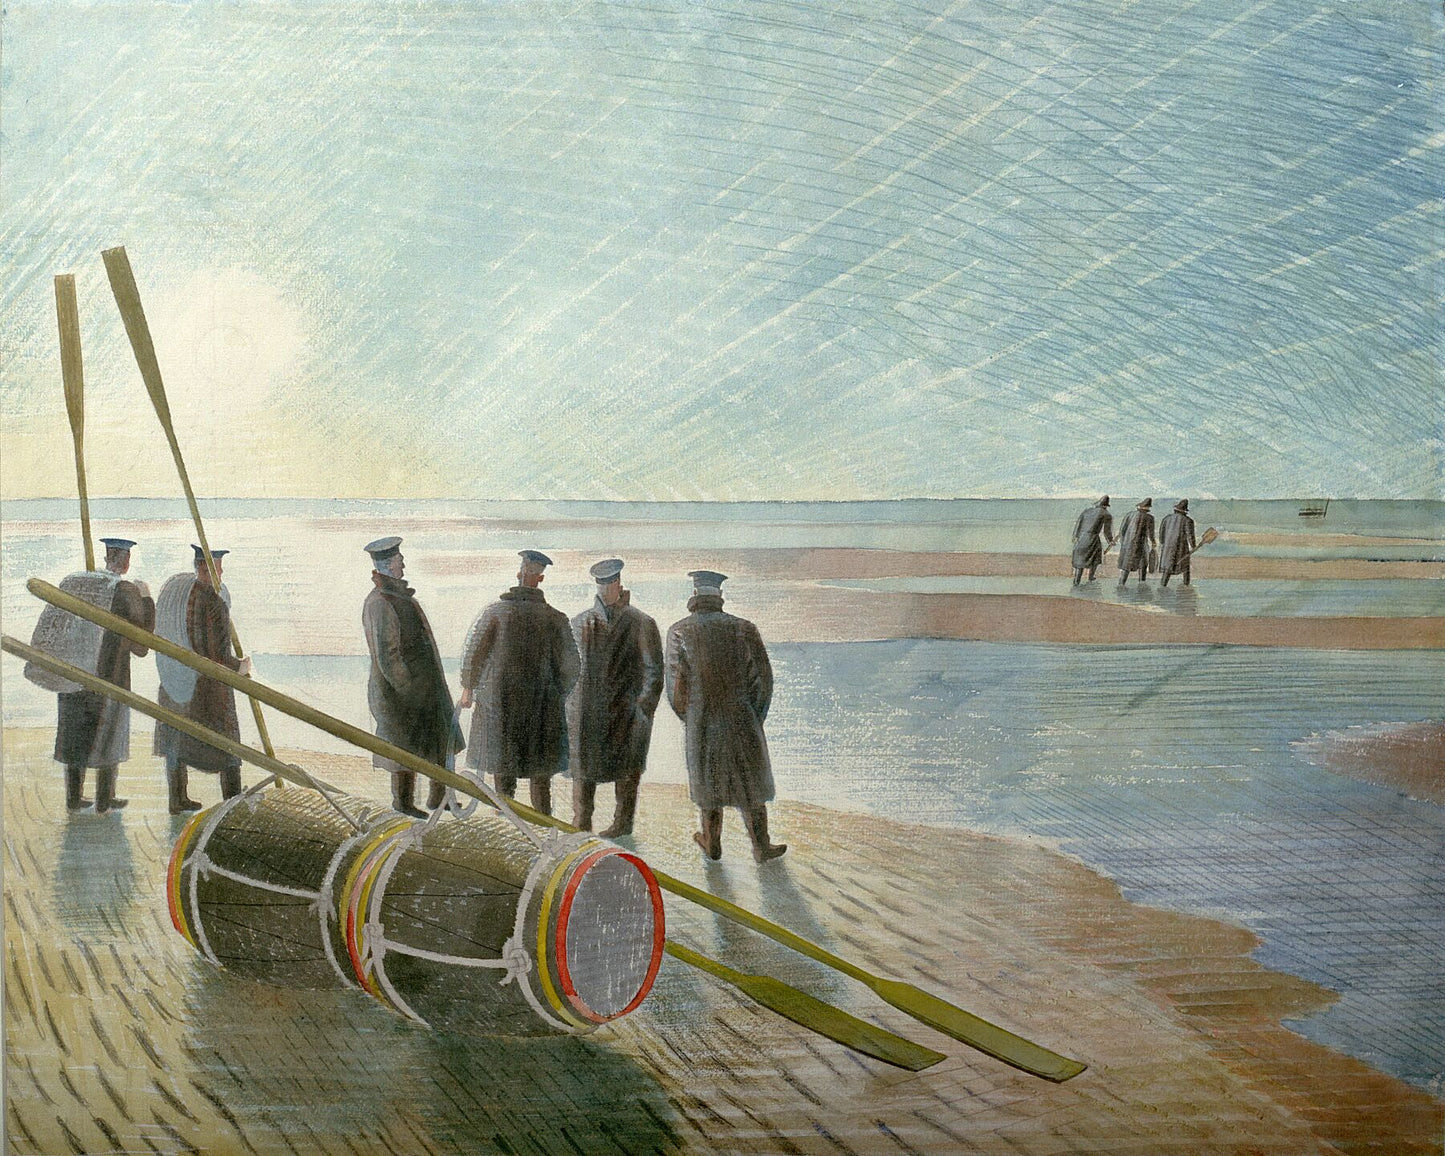 Anchor and Boats at Rye, England by Eric Ravilious, 1938